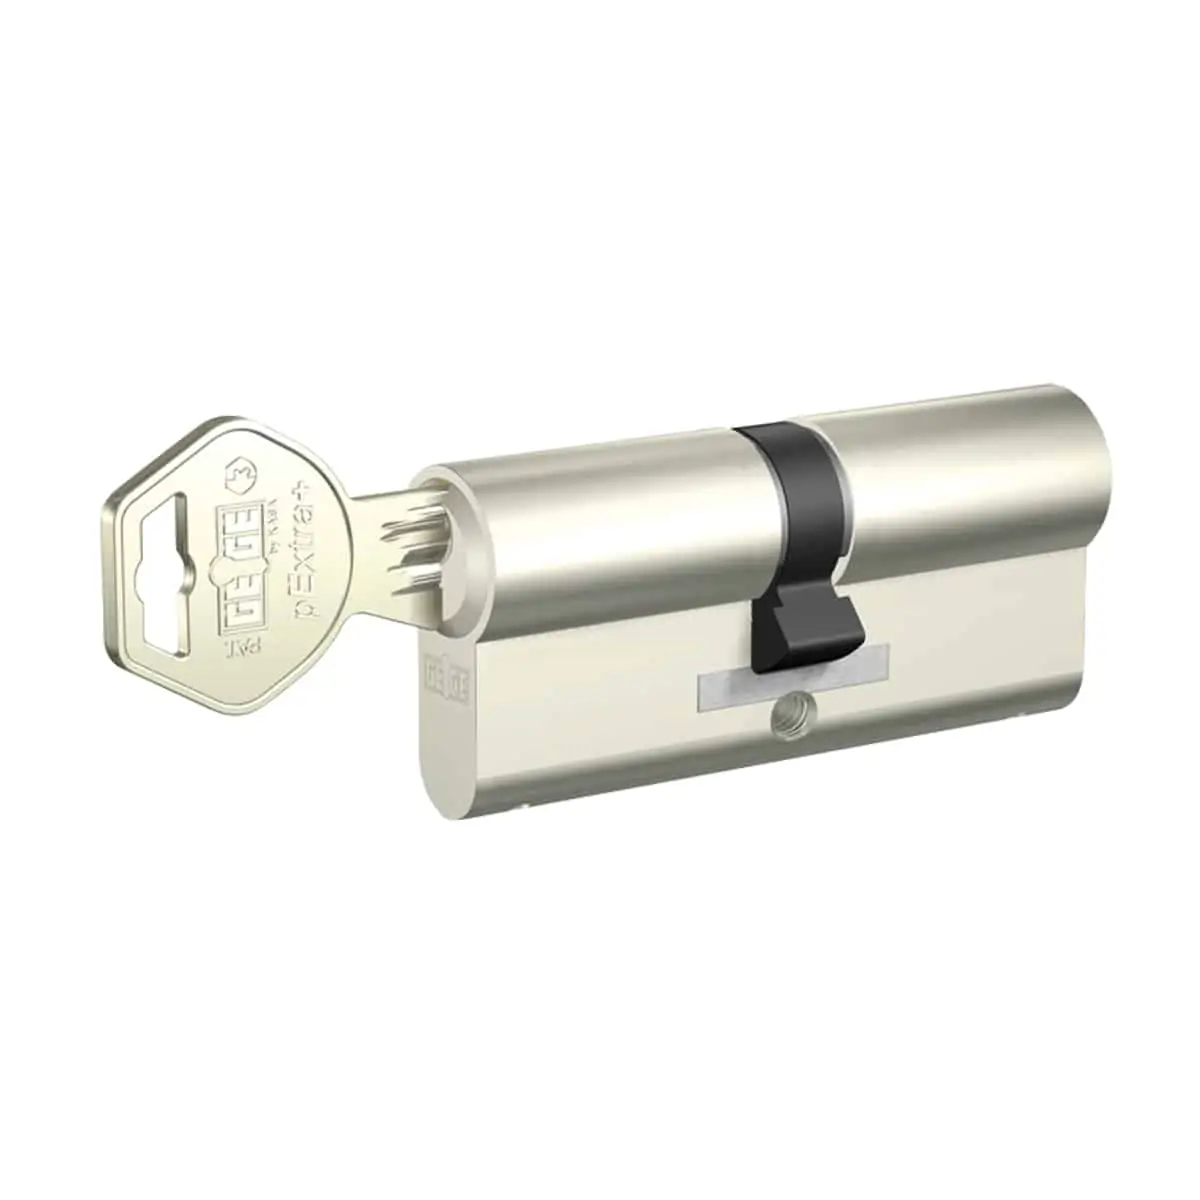 Dormakaba cylinder lock set for door with reversible key system at the best price